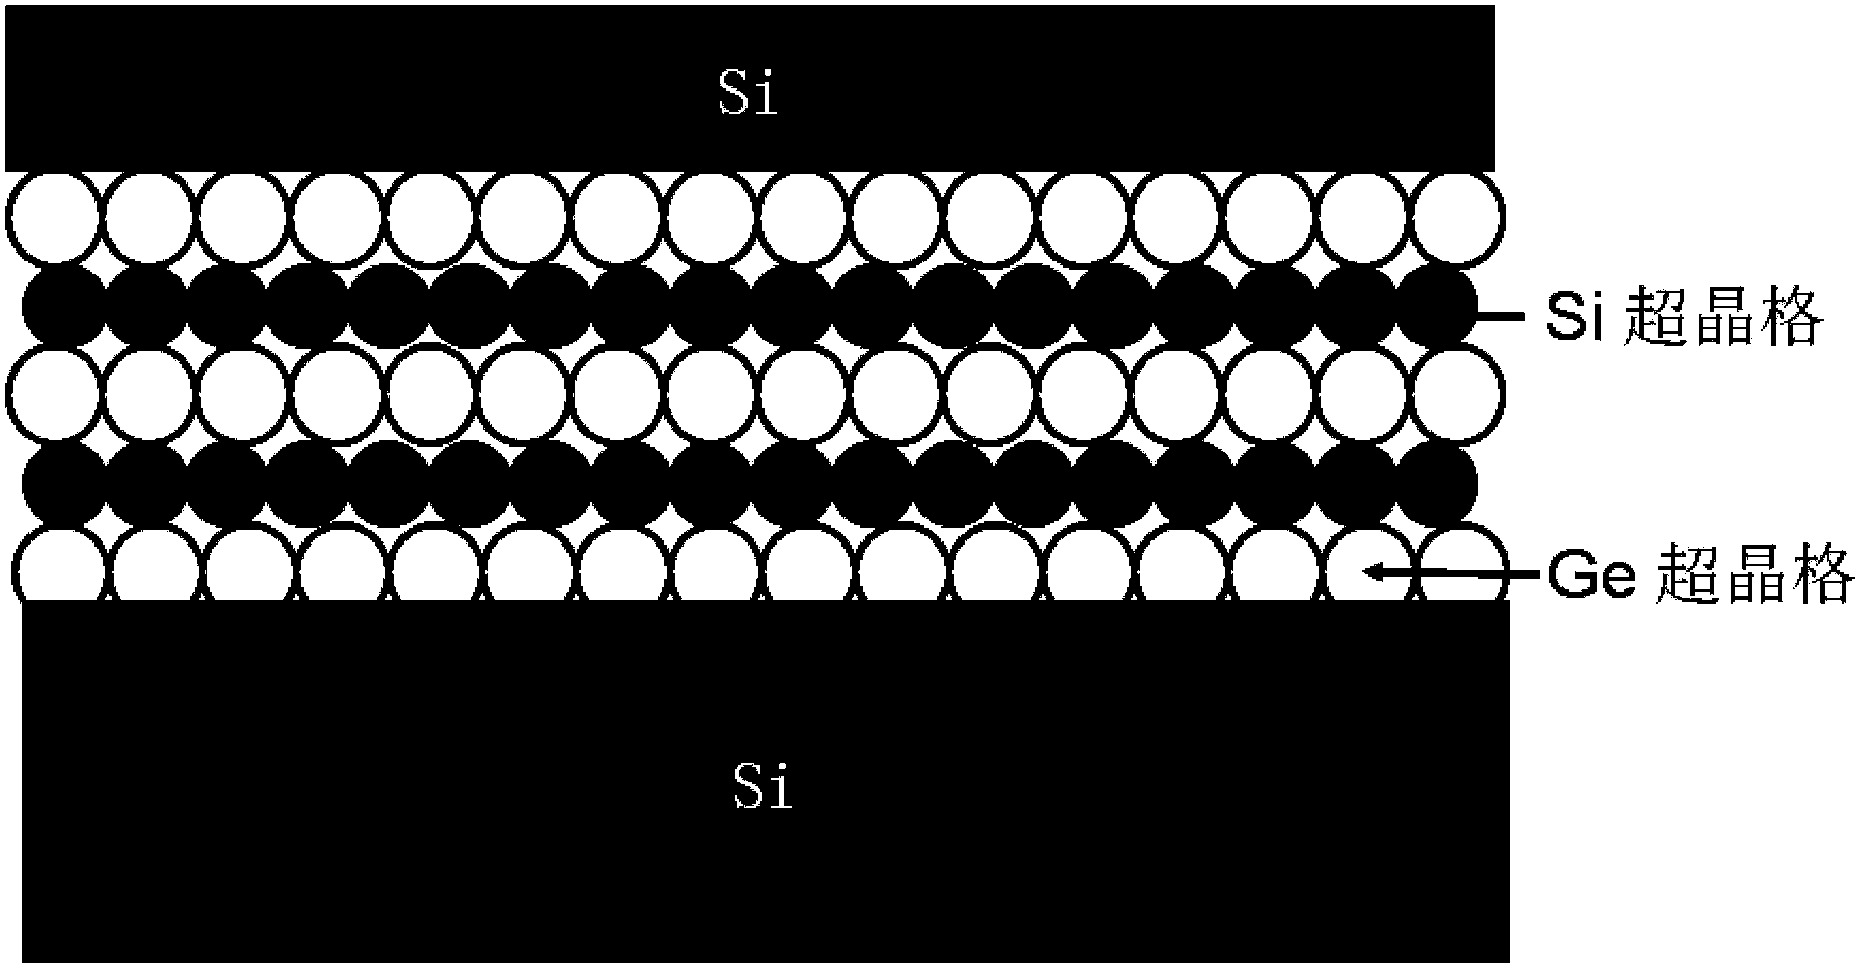 Multi-junction heterogeneous quantum dot array and manufacturing method thereof and multi-junction heterogeneous quantum dot solar cell and manufacturing method thereof